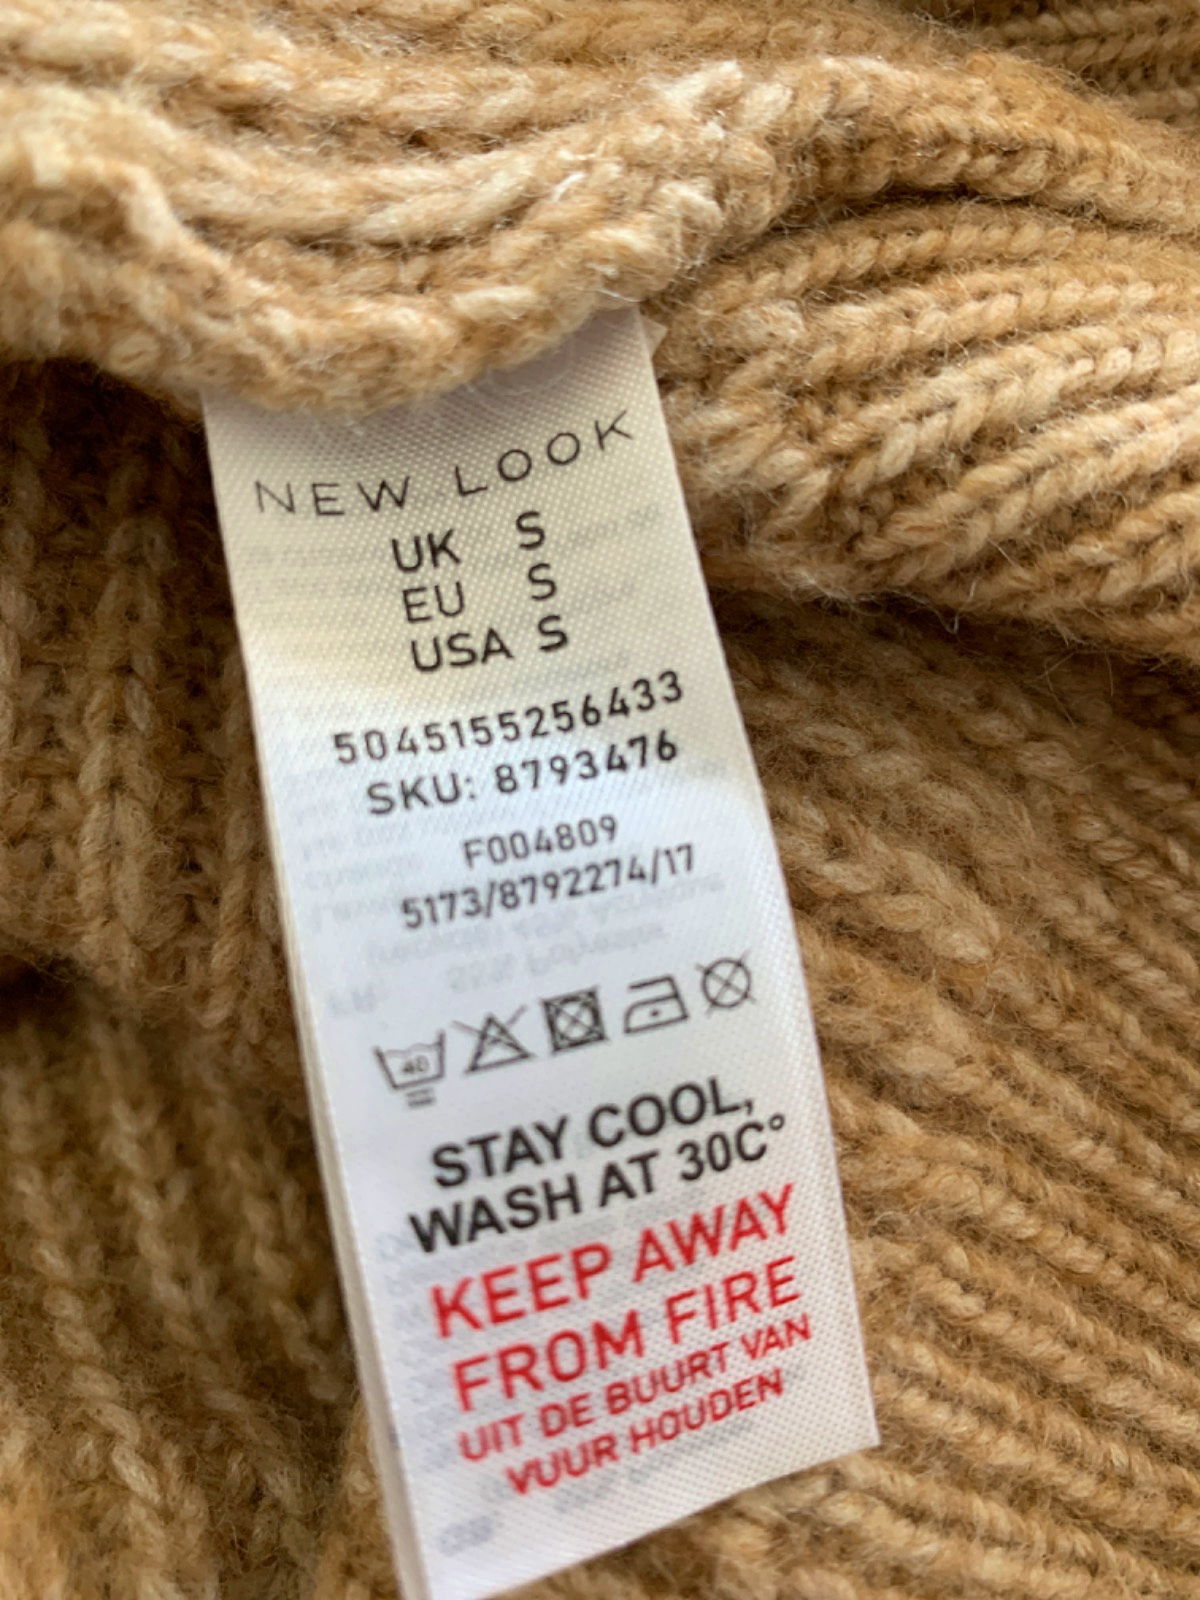 New Look Camel Cable Knit Jumper UK S